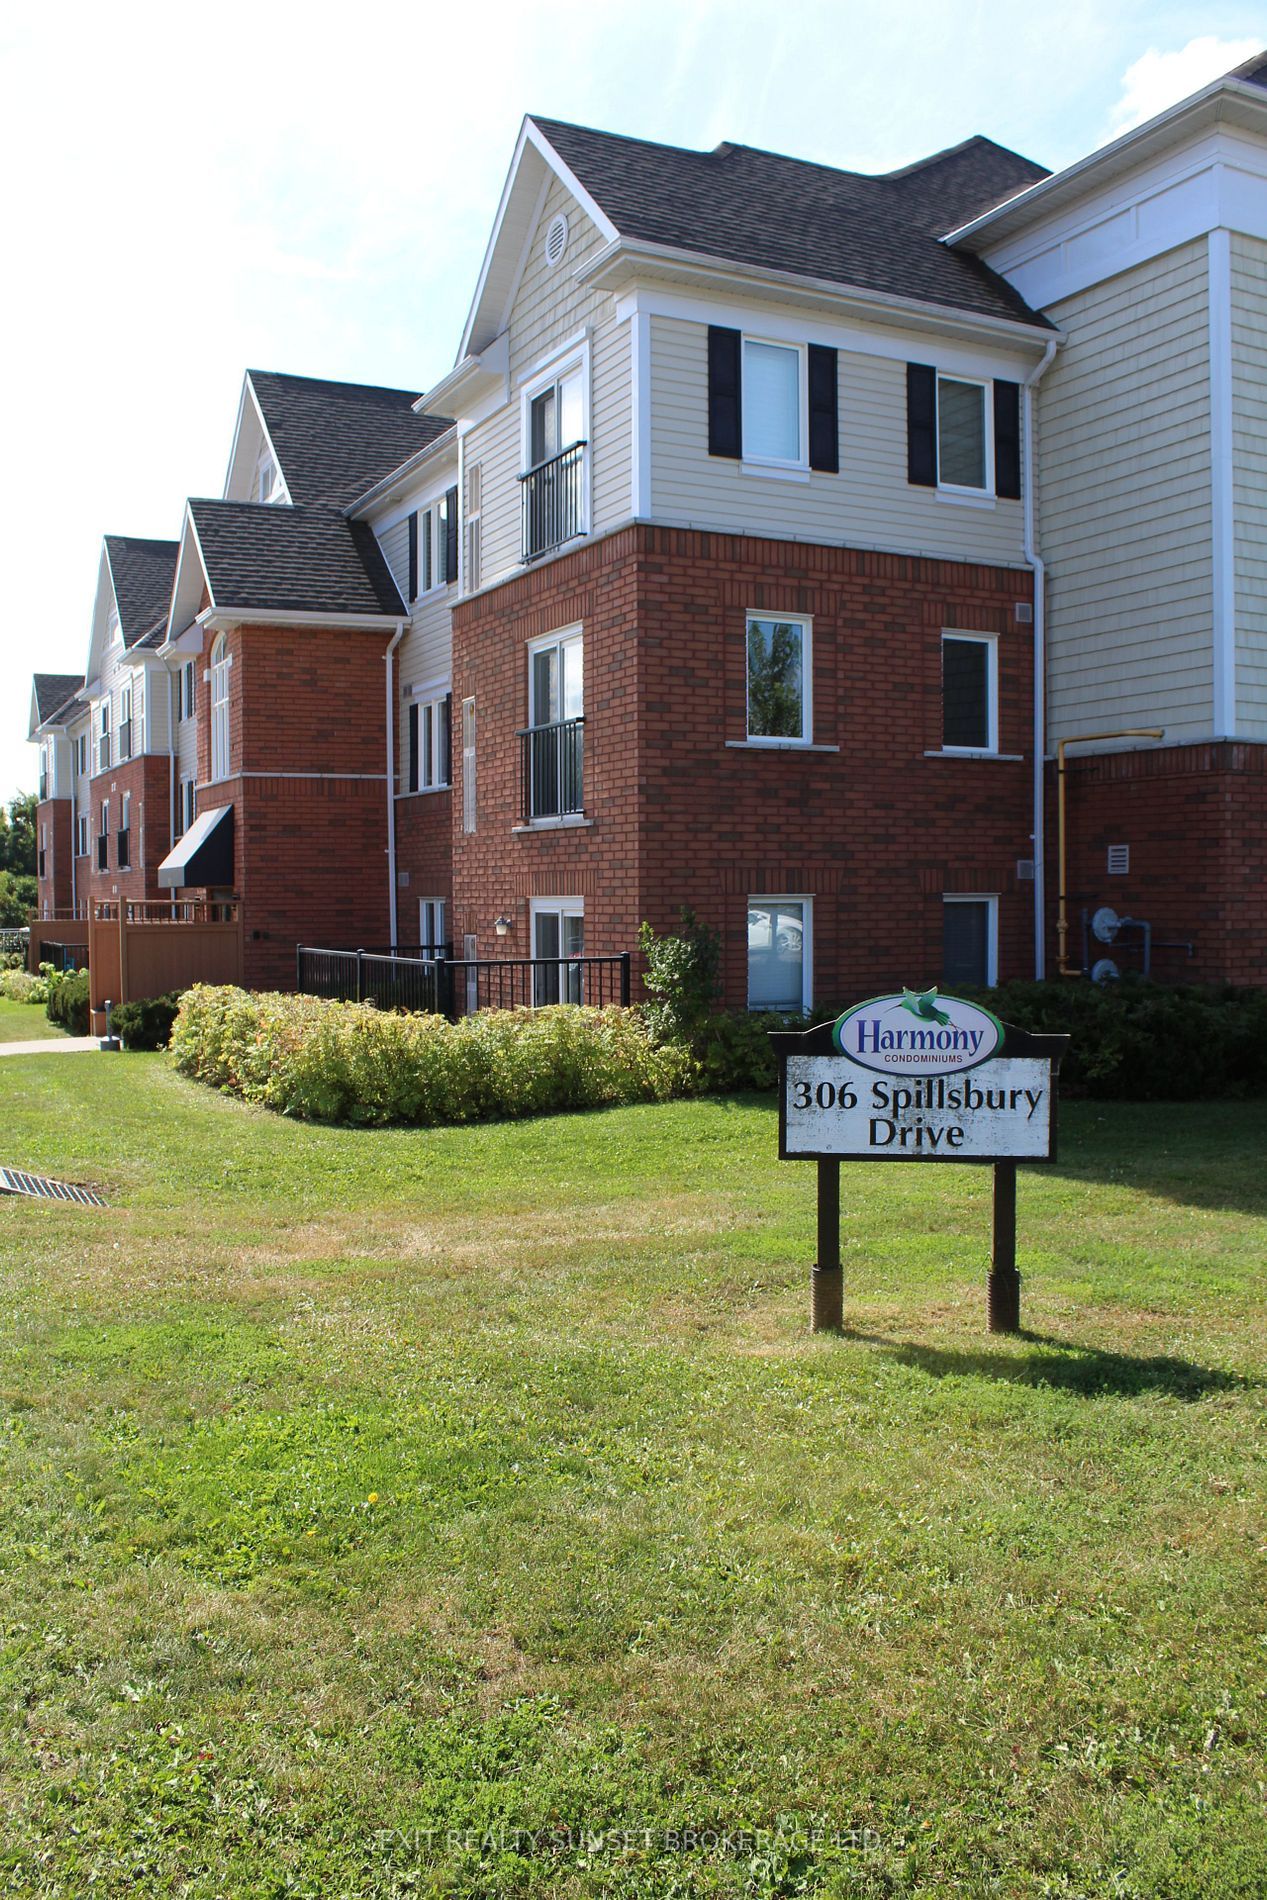 We have sold a property at 201 306 Spillsbury DR in Peterborough